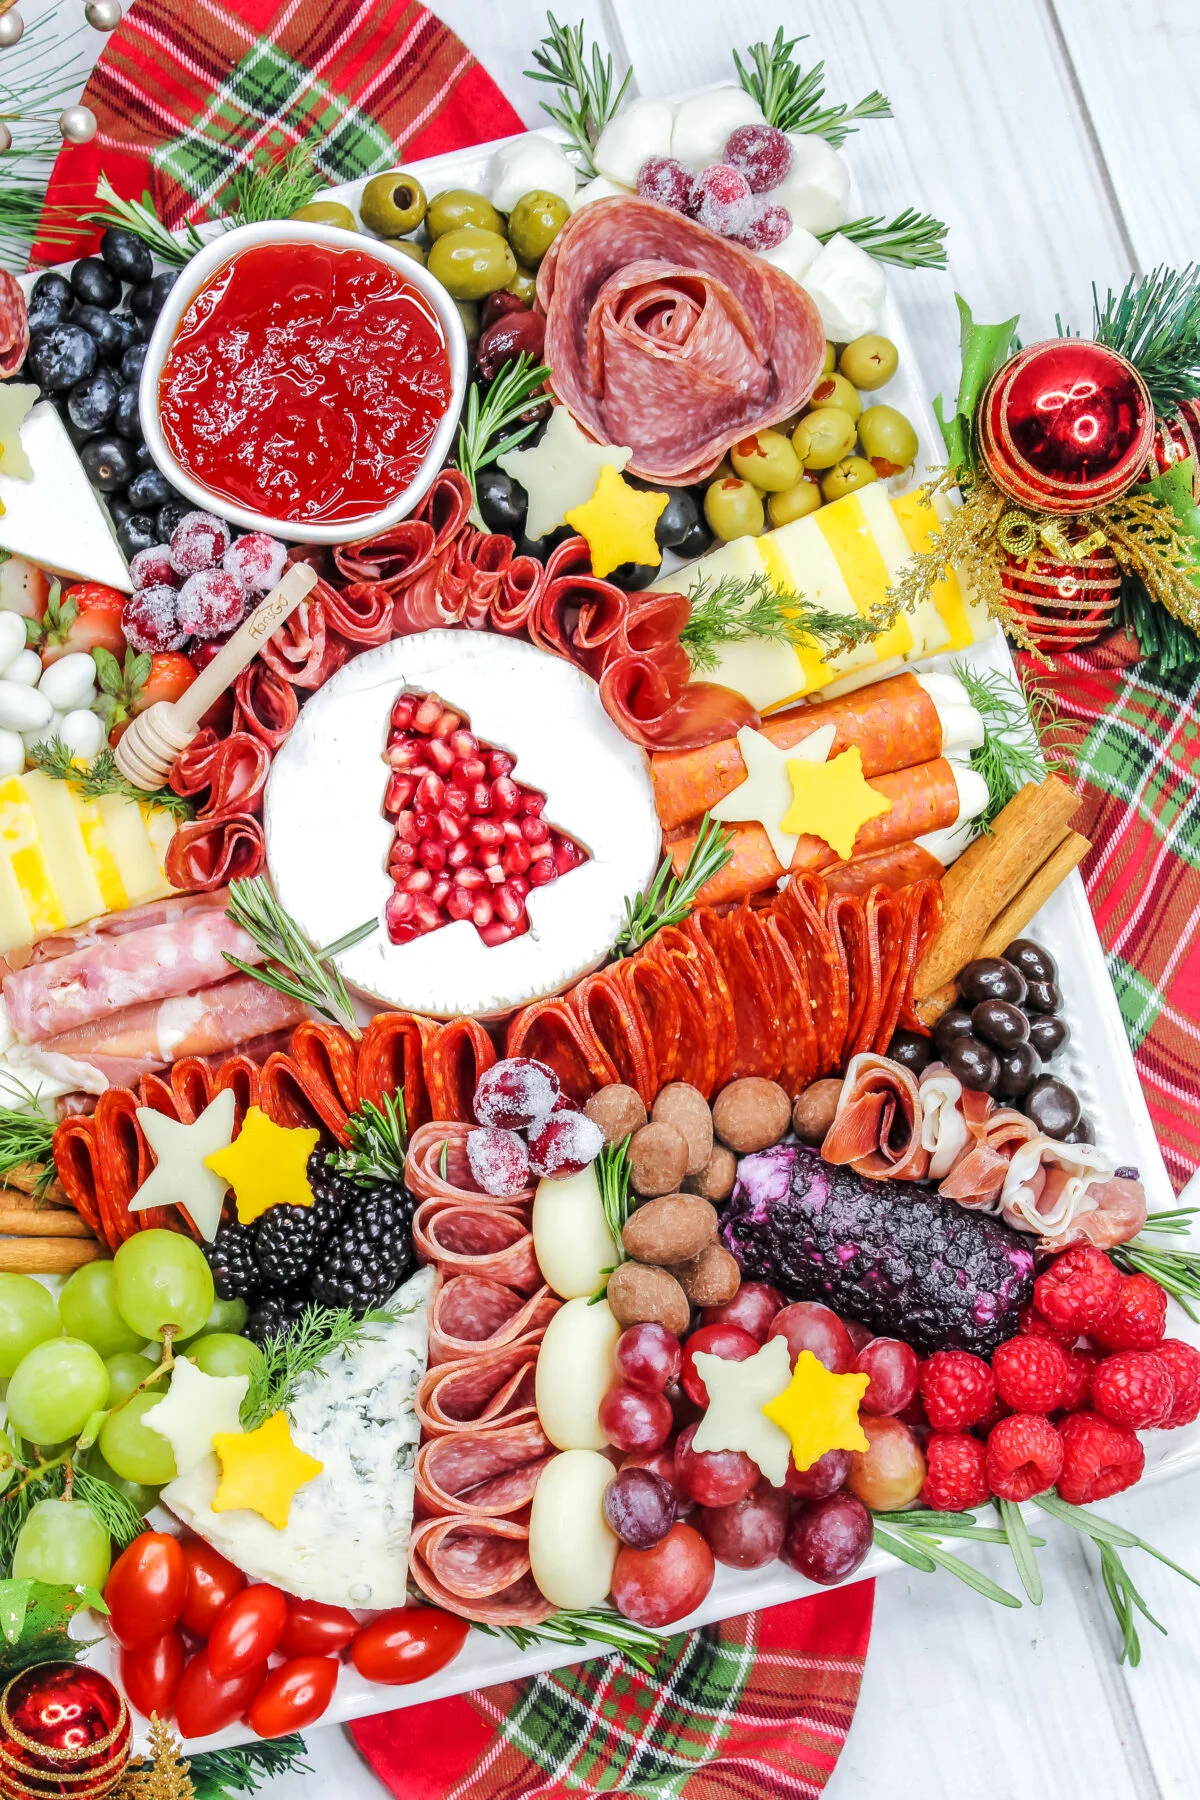 Looking for a delicious and easy Christmas appetizer? This detailed Christmas charcuterie board recipe is perfect for your holiday party!